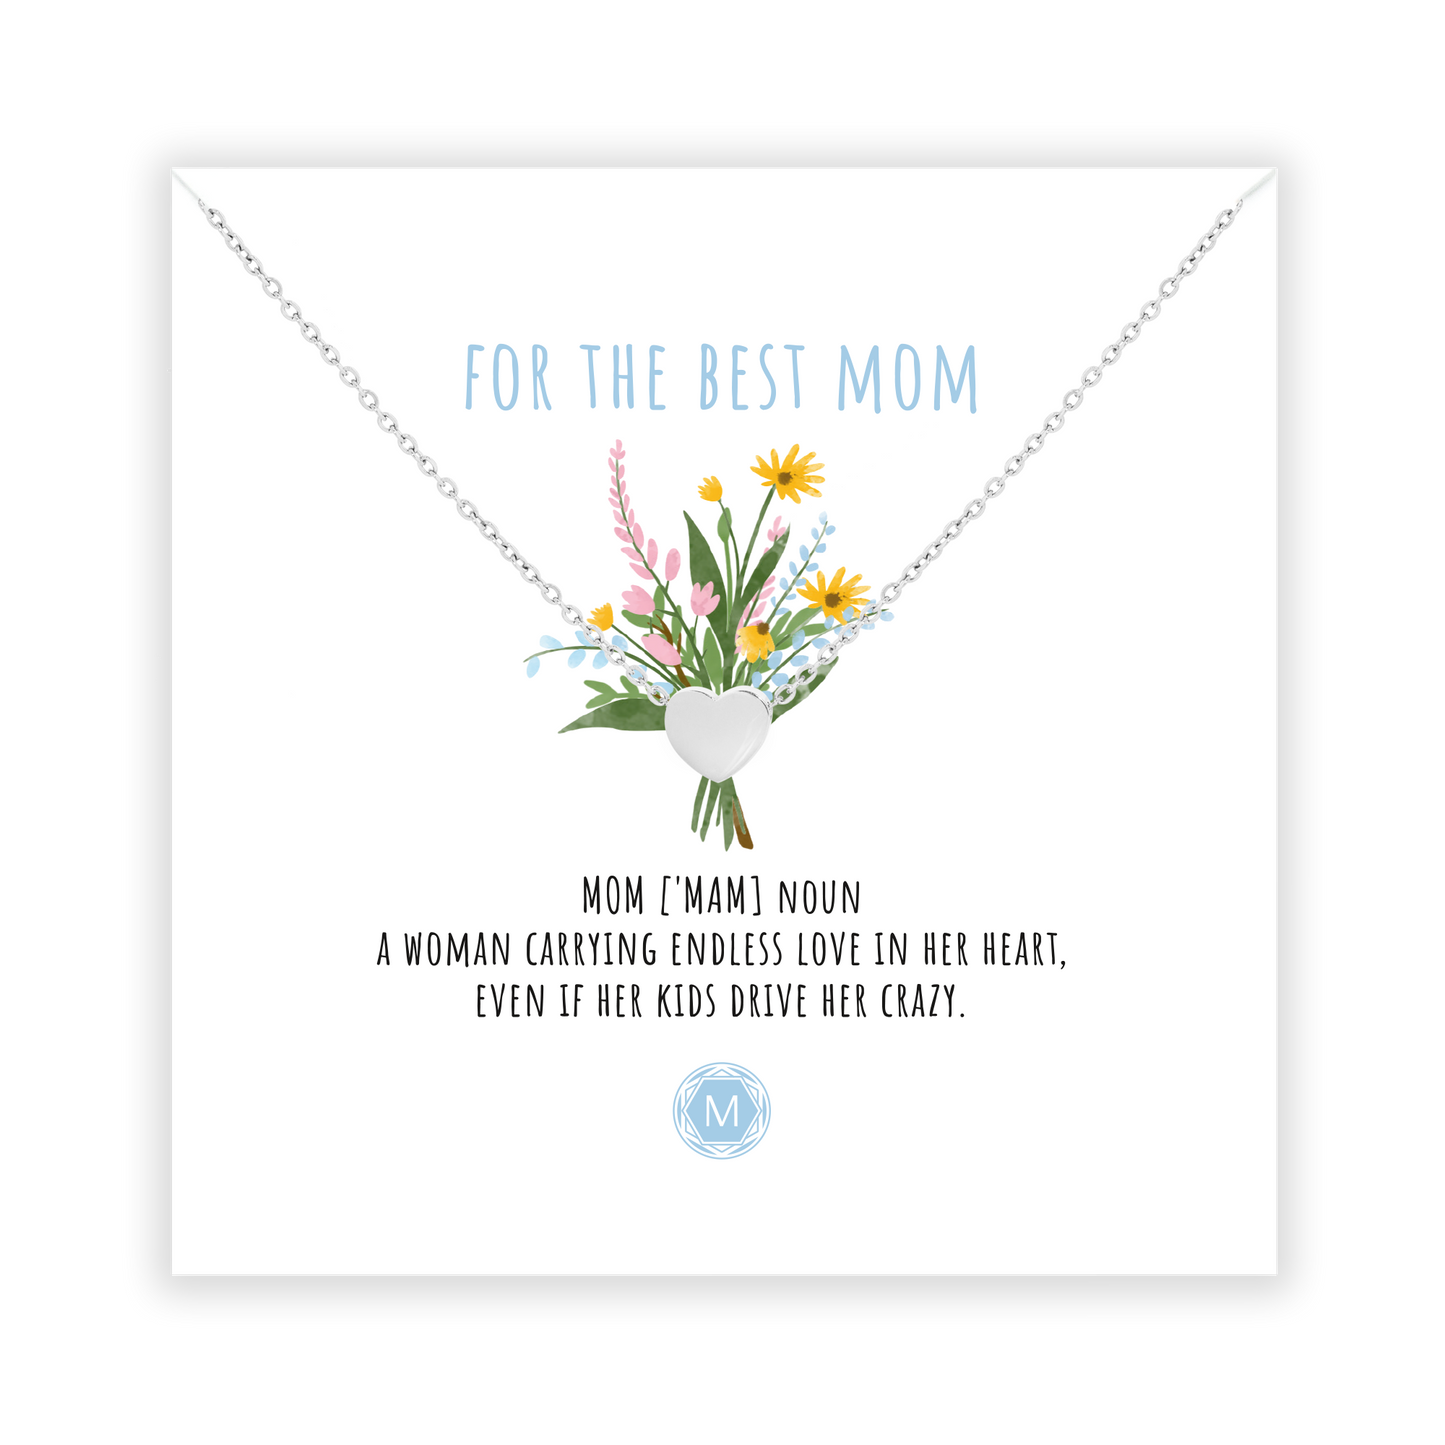 FOR THE BEST MOM Collana